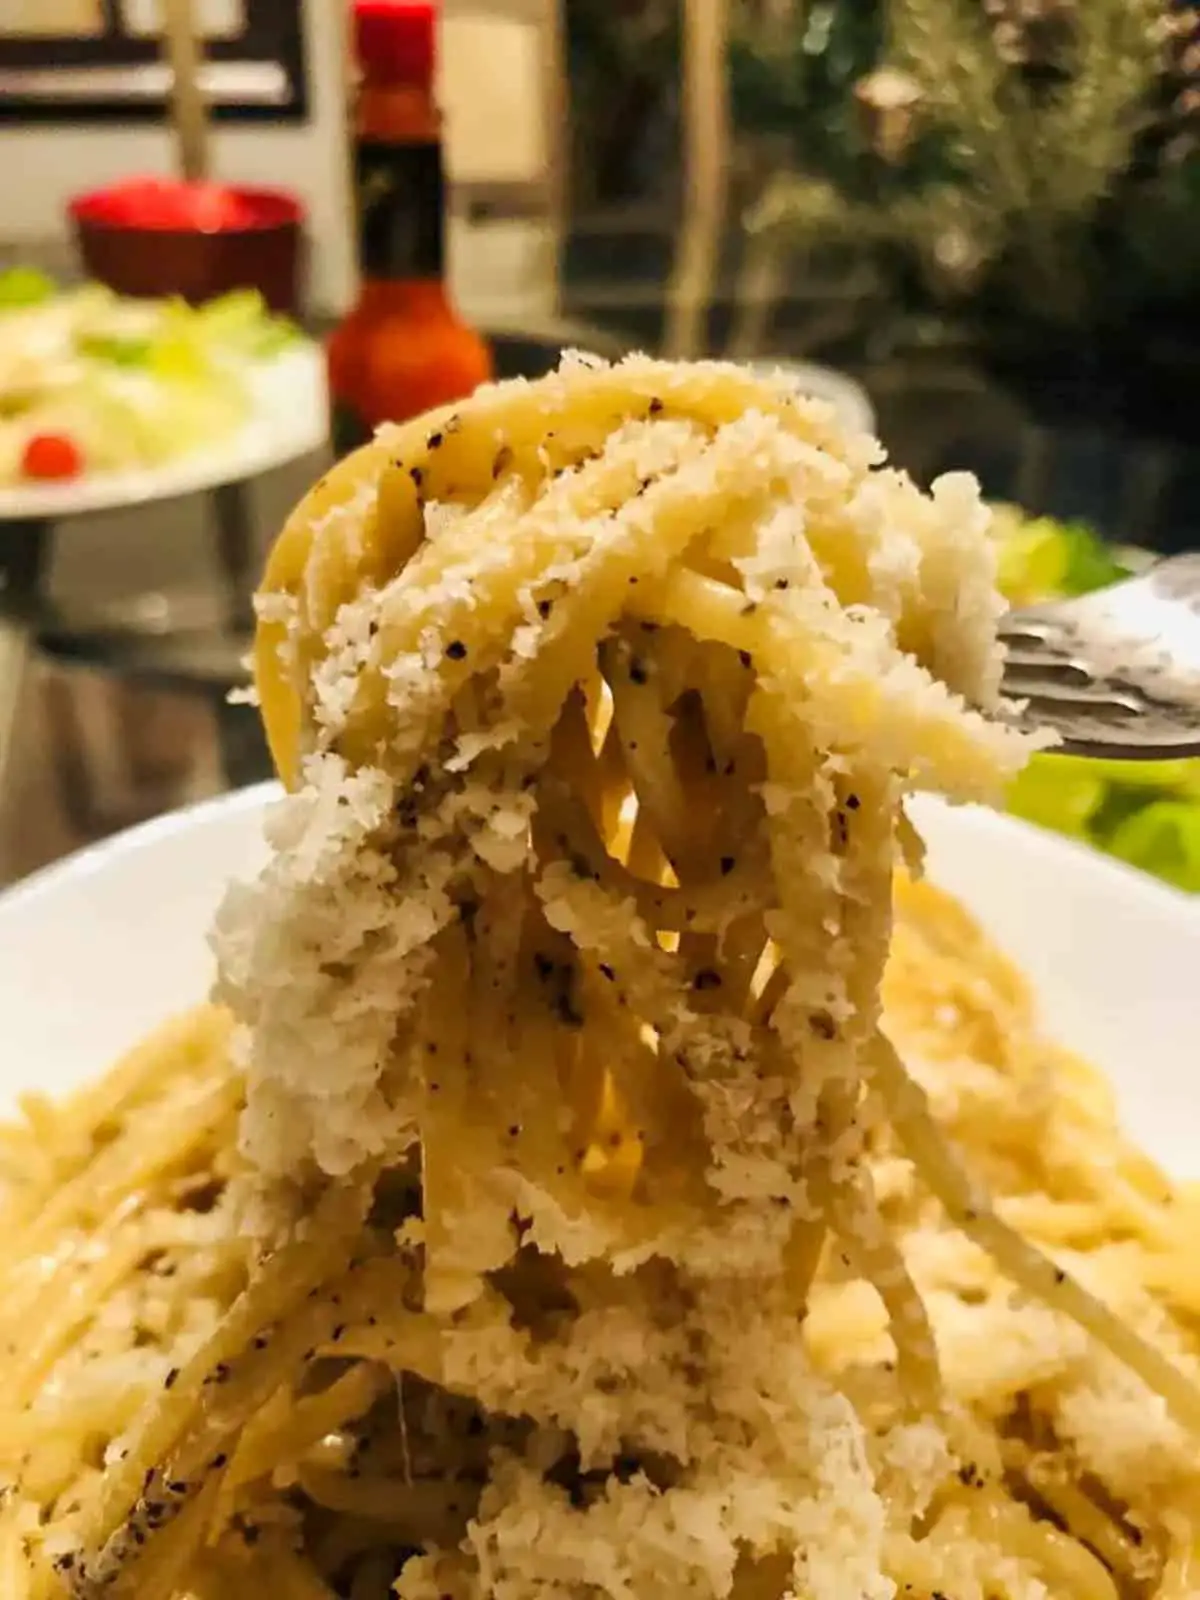 Cacio e pepe with grated pecorino romano cheese being held by a fork. There is a salad in the background.